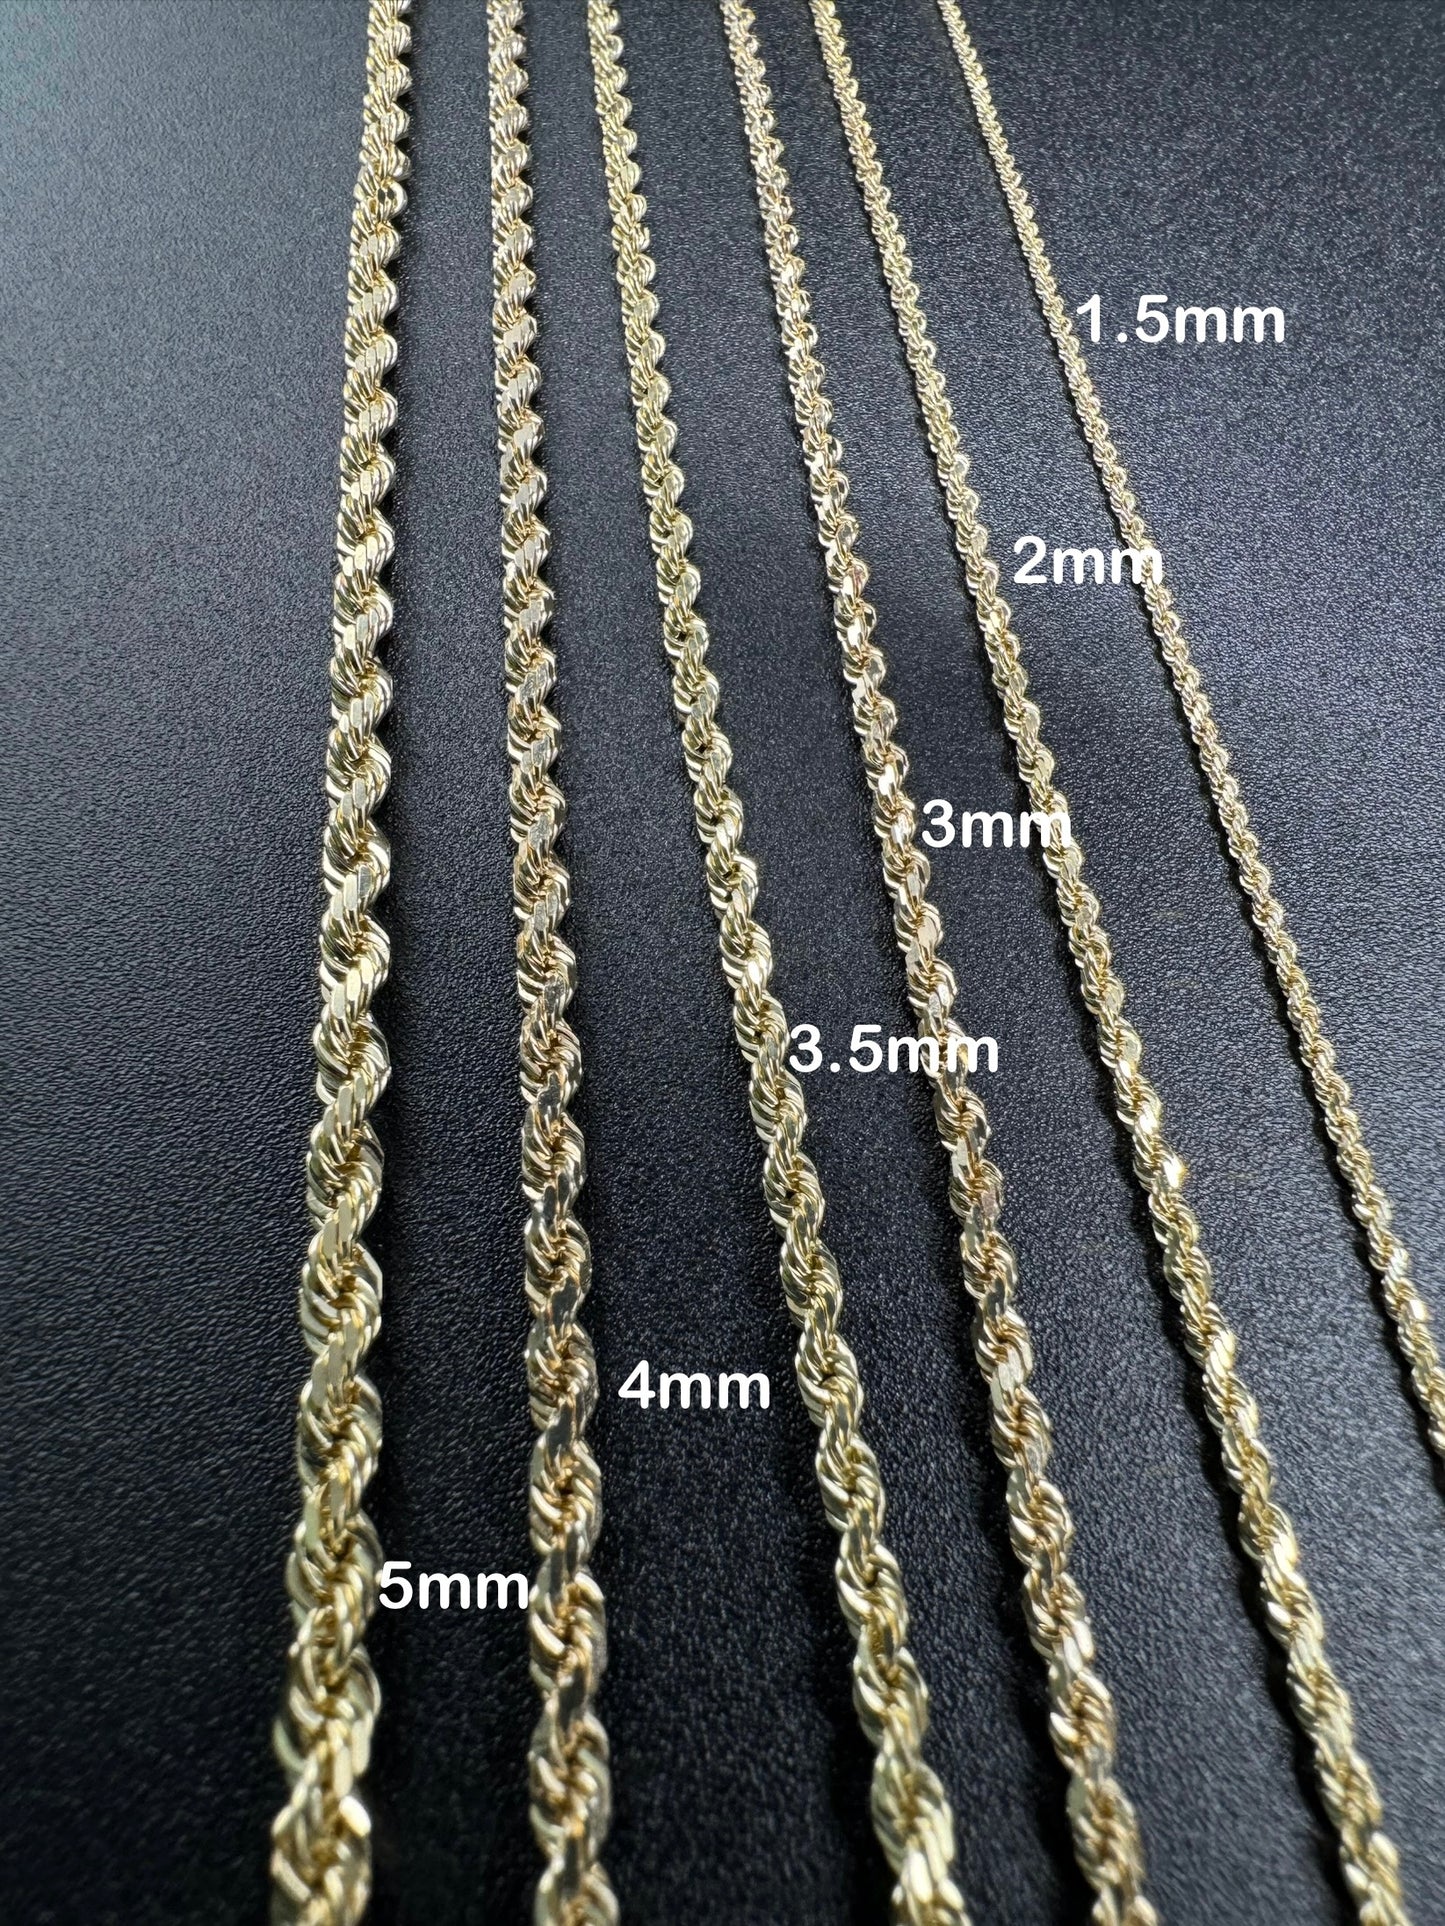 1.5mm solid rope chain